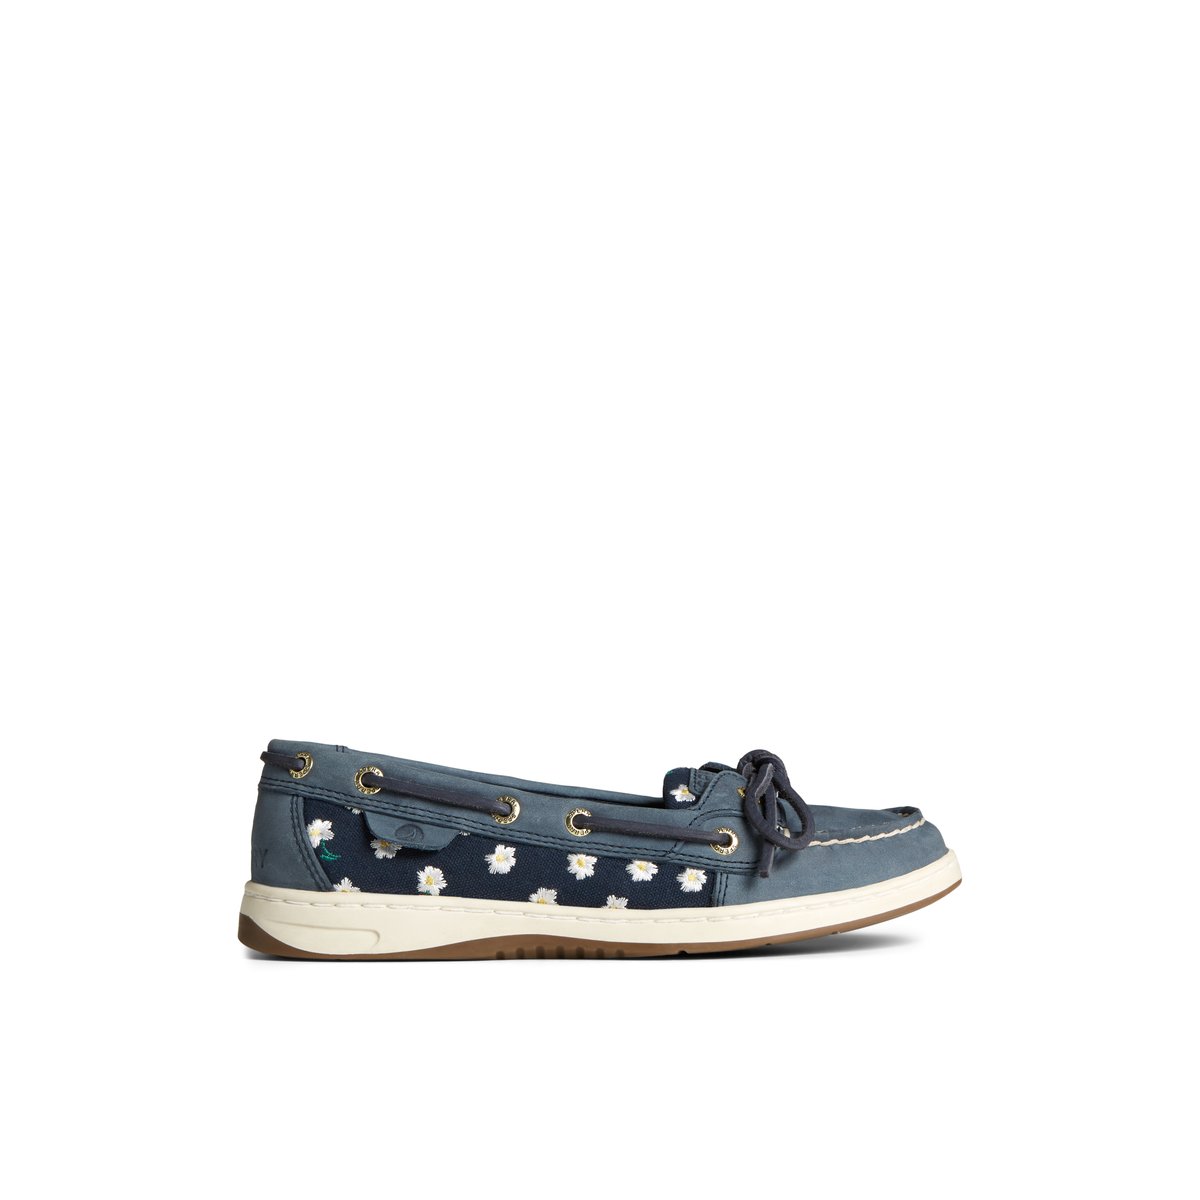 Women's Top-Sider Shoes, Apparel & Accessories | Sperry | Sperry US